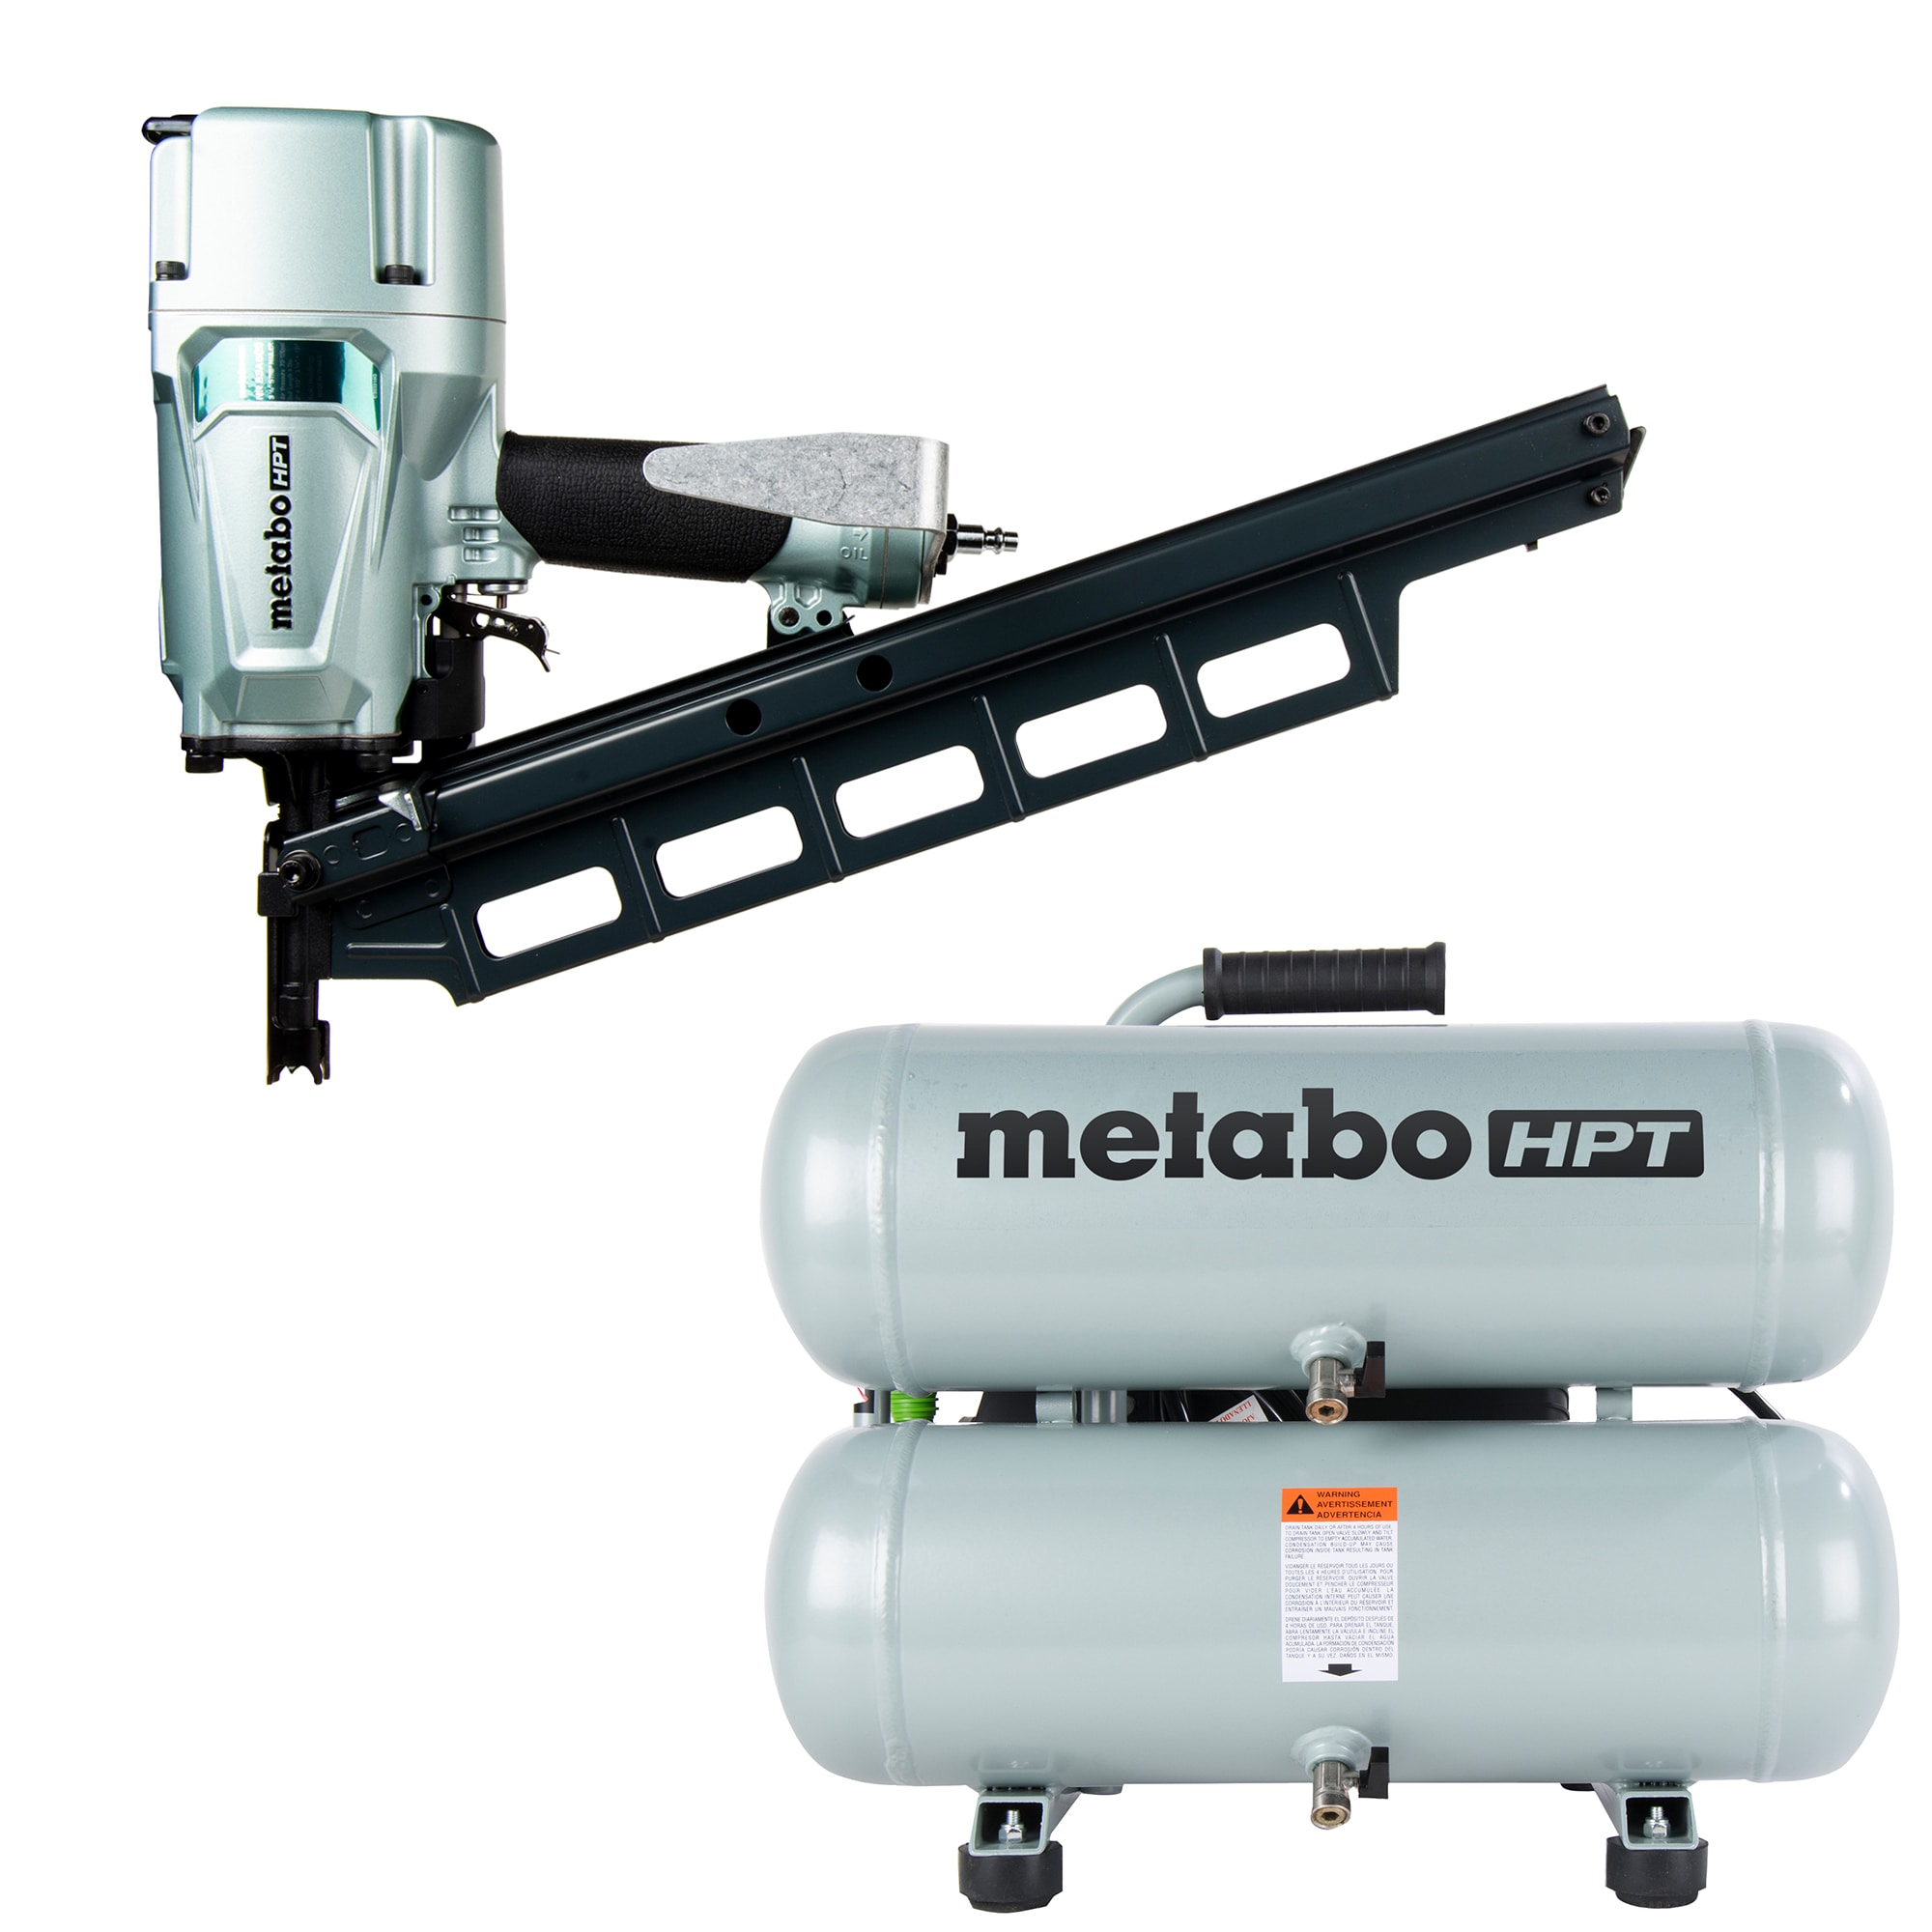 Metabo HPT 21-Degree Pneumatic Framing Nailer with 4-Gallon Single Stage Portable Electric Twin Stack Air Compressor